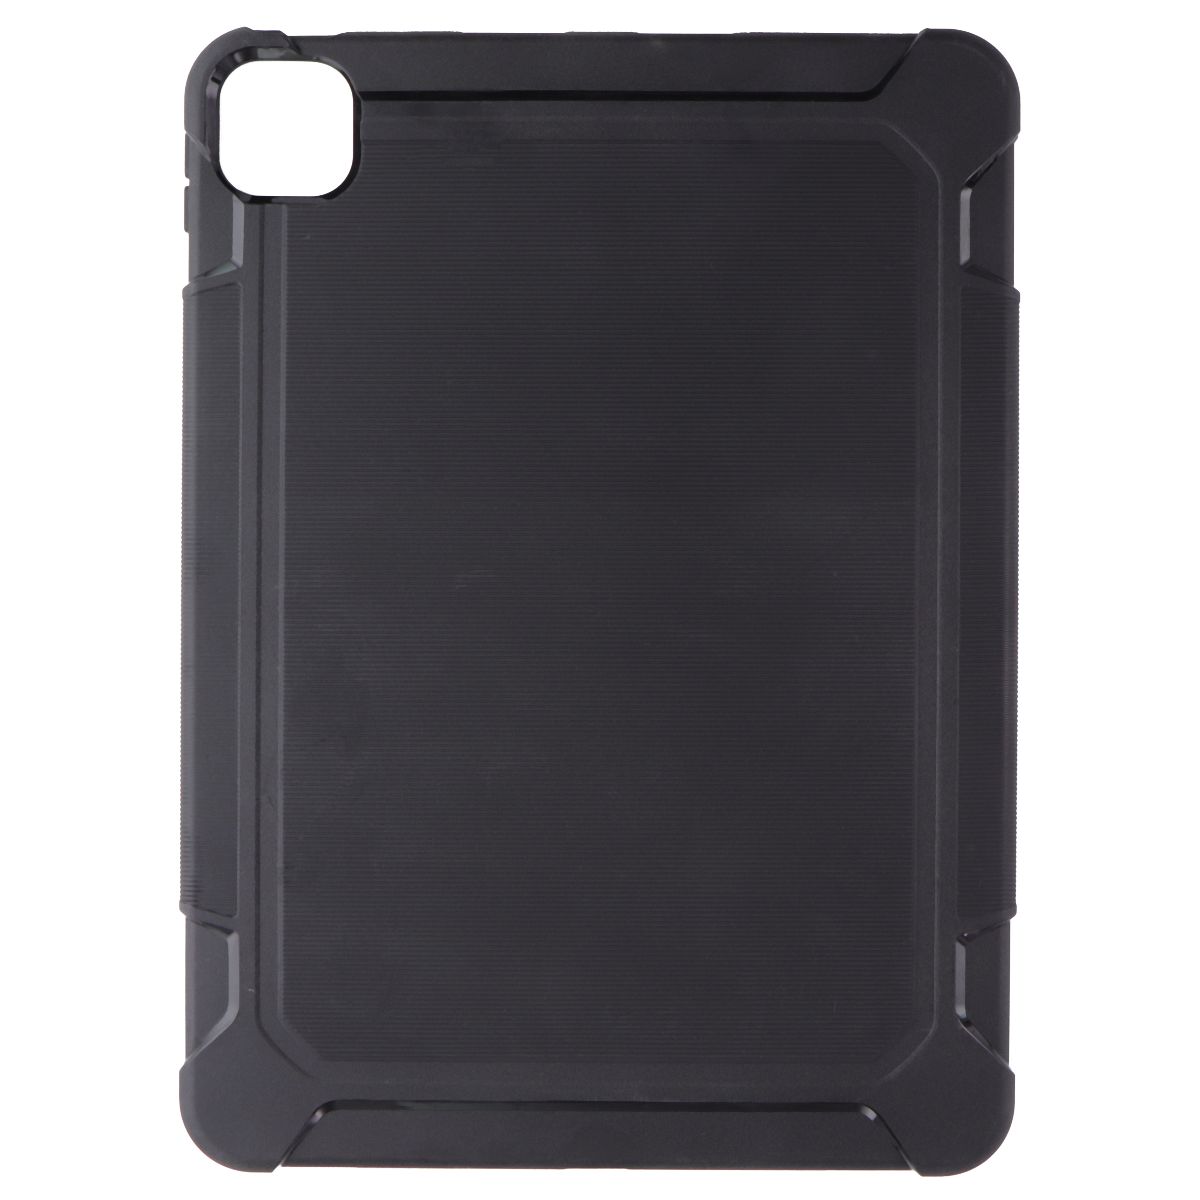 Onn. Slim Rugged Gel Case for iPad Pro 11-inch (3rd/2nd/1st Gen) - Black iPad/Tablet Accessories - Cases, Covers, Keyboard Folios ONN    - Simple Cell Bulk Wholesale Pricing - USA Seller